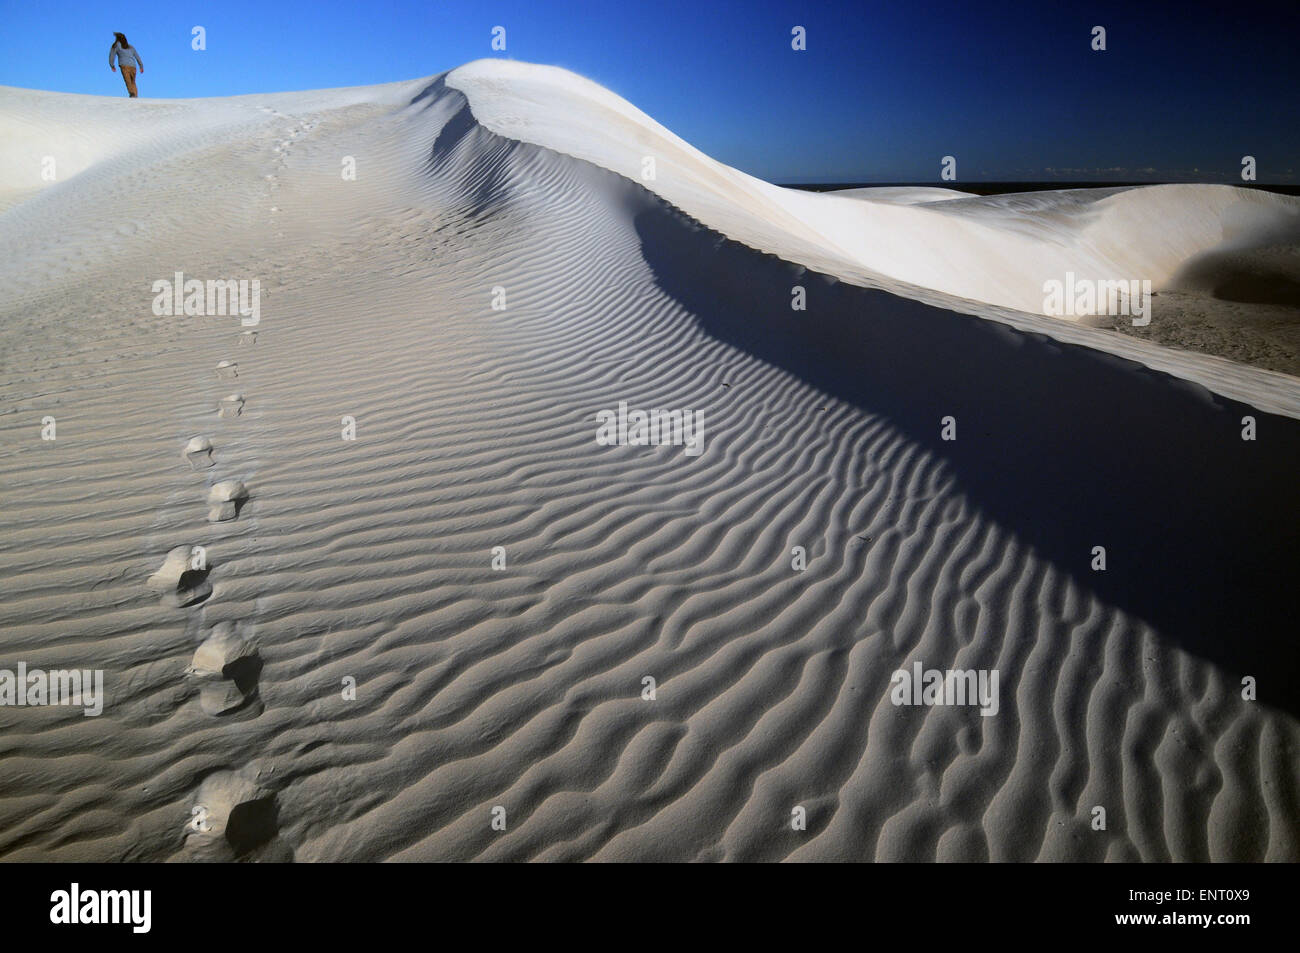 Footprints of person walking up wind-sculpted sand dune, Nambung National Park, Western Australia. No MR Stock Photo